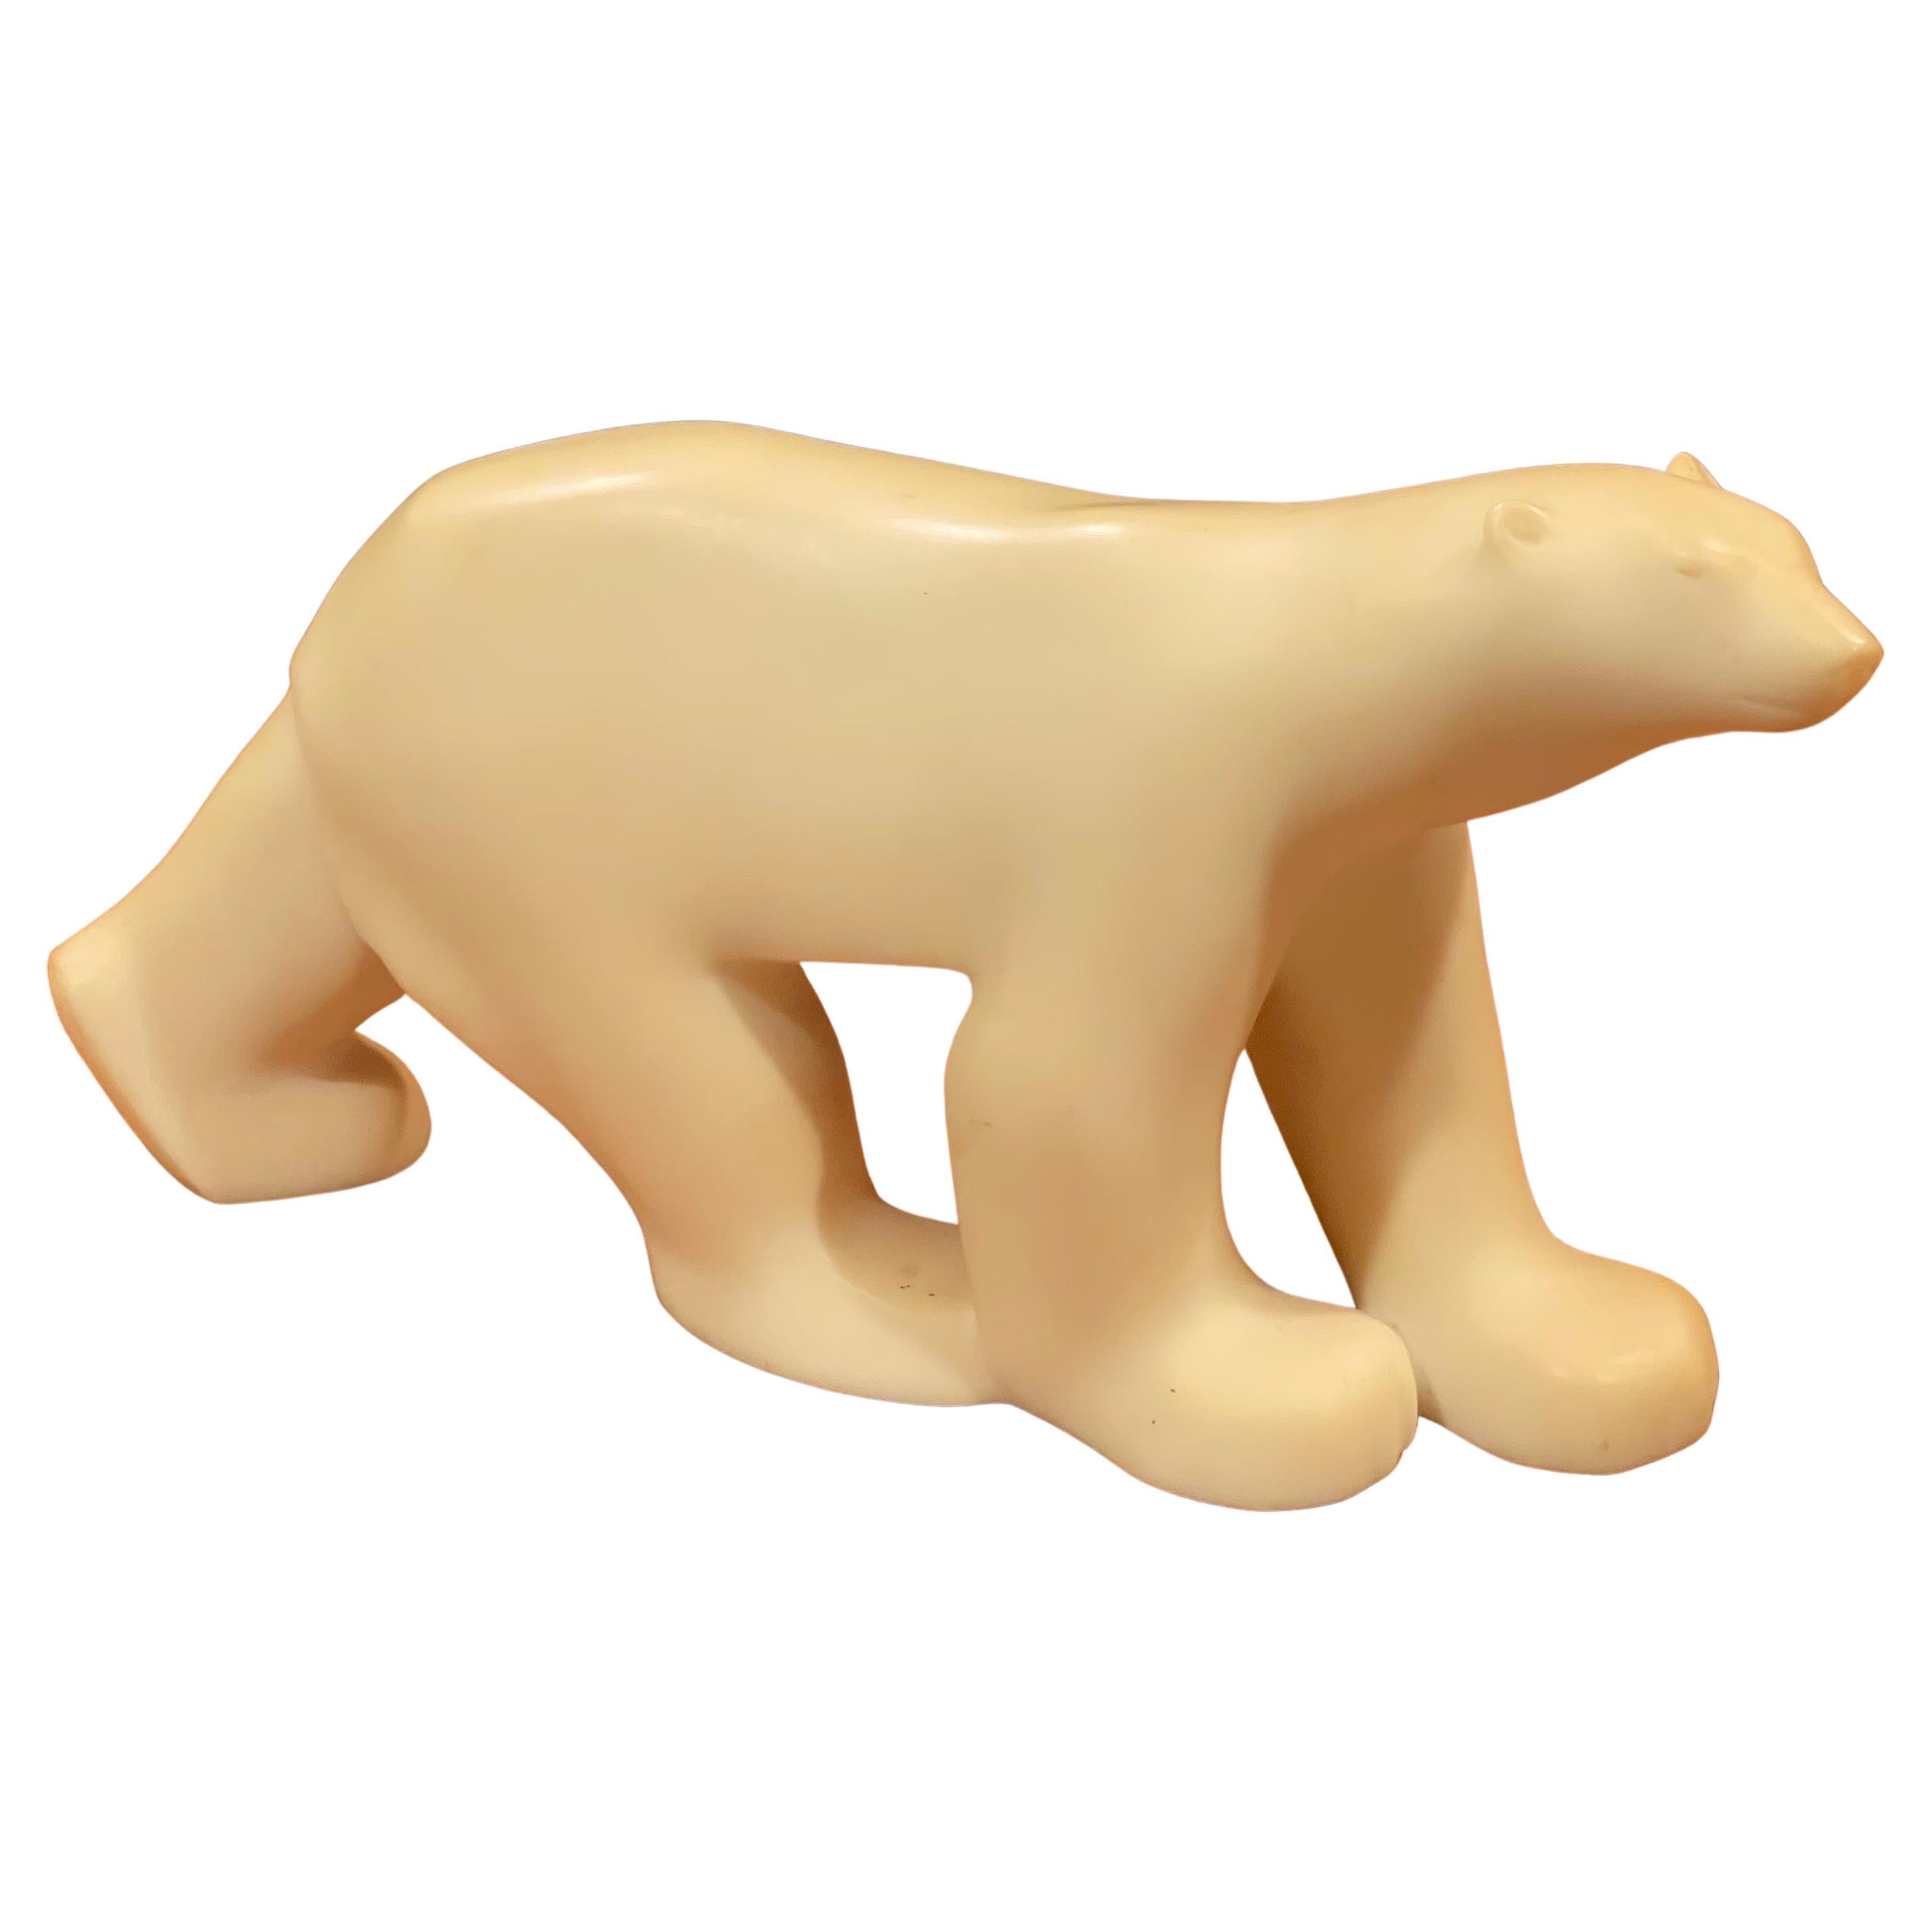 Resin Bear Claw 3 1 2" 5399002 for sale online 